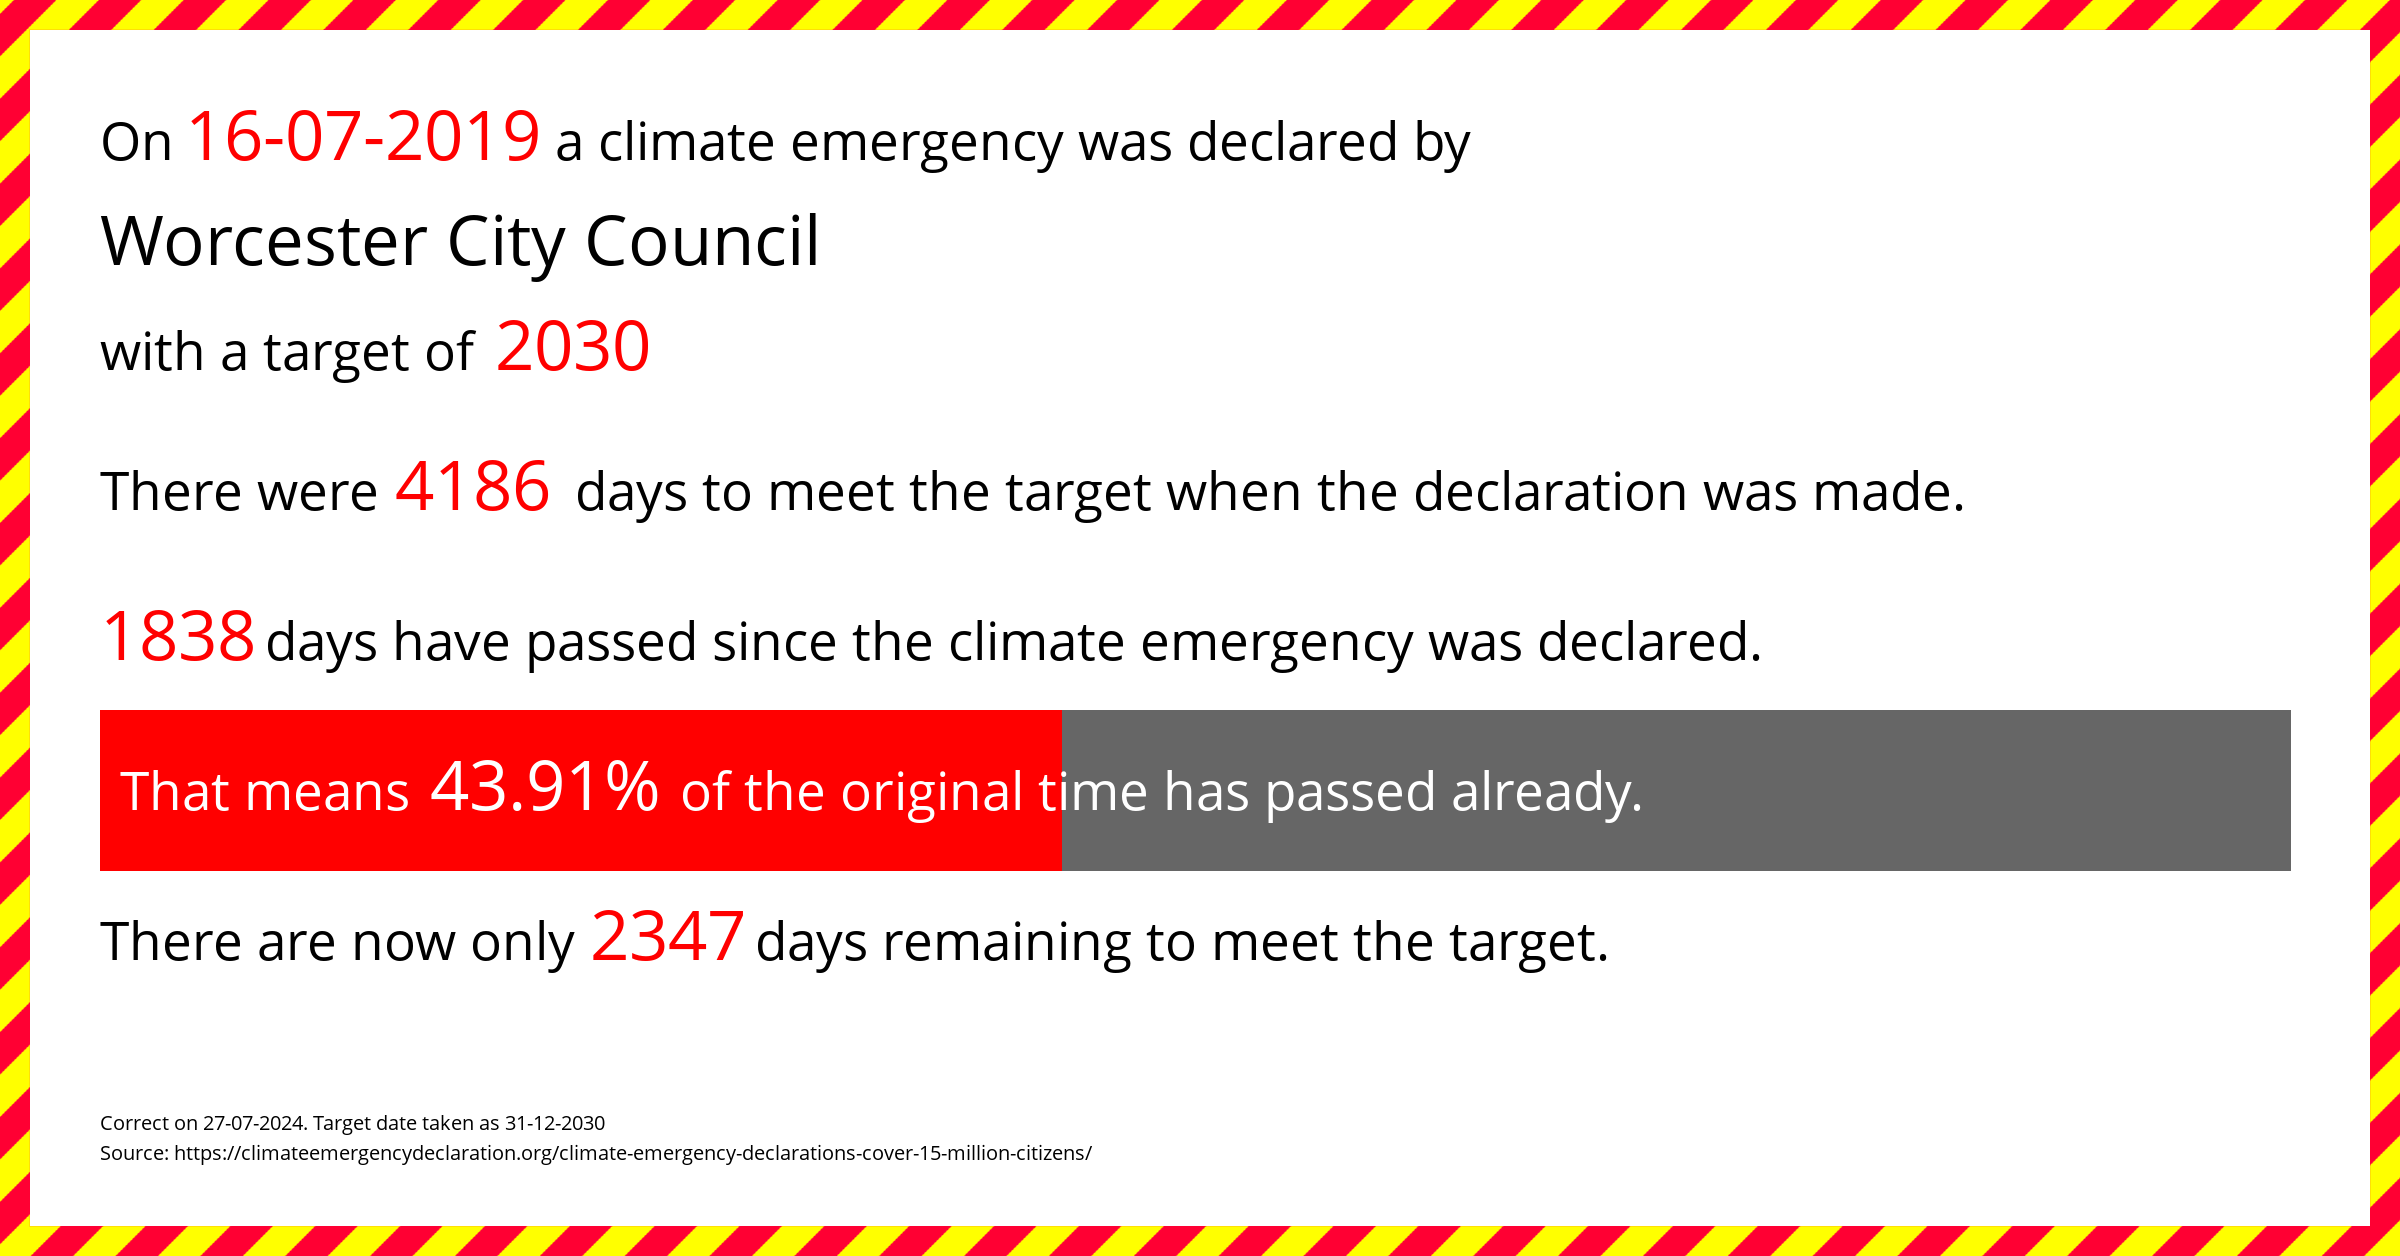 Worcester City Council declared a Climate emergency on Tuesday 16th July 2019, with a target of 2030.